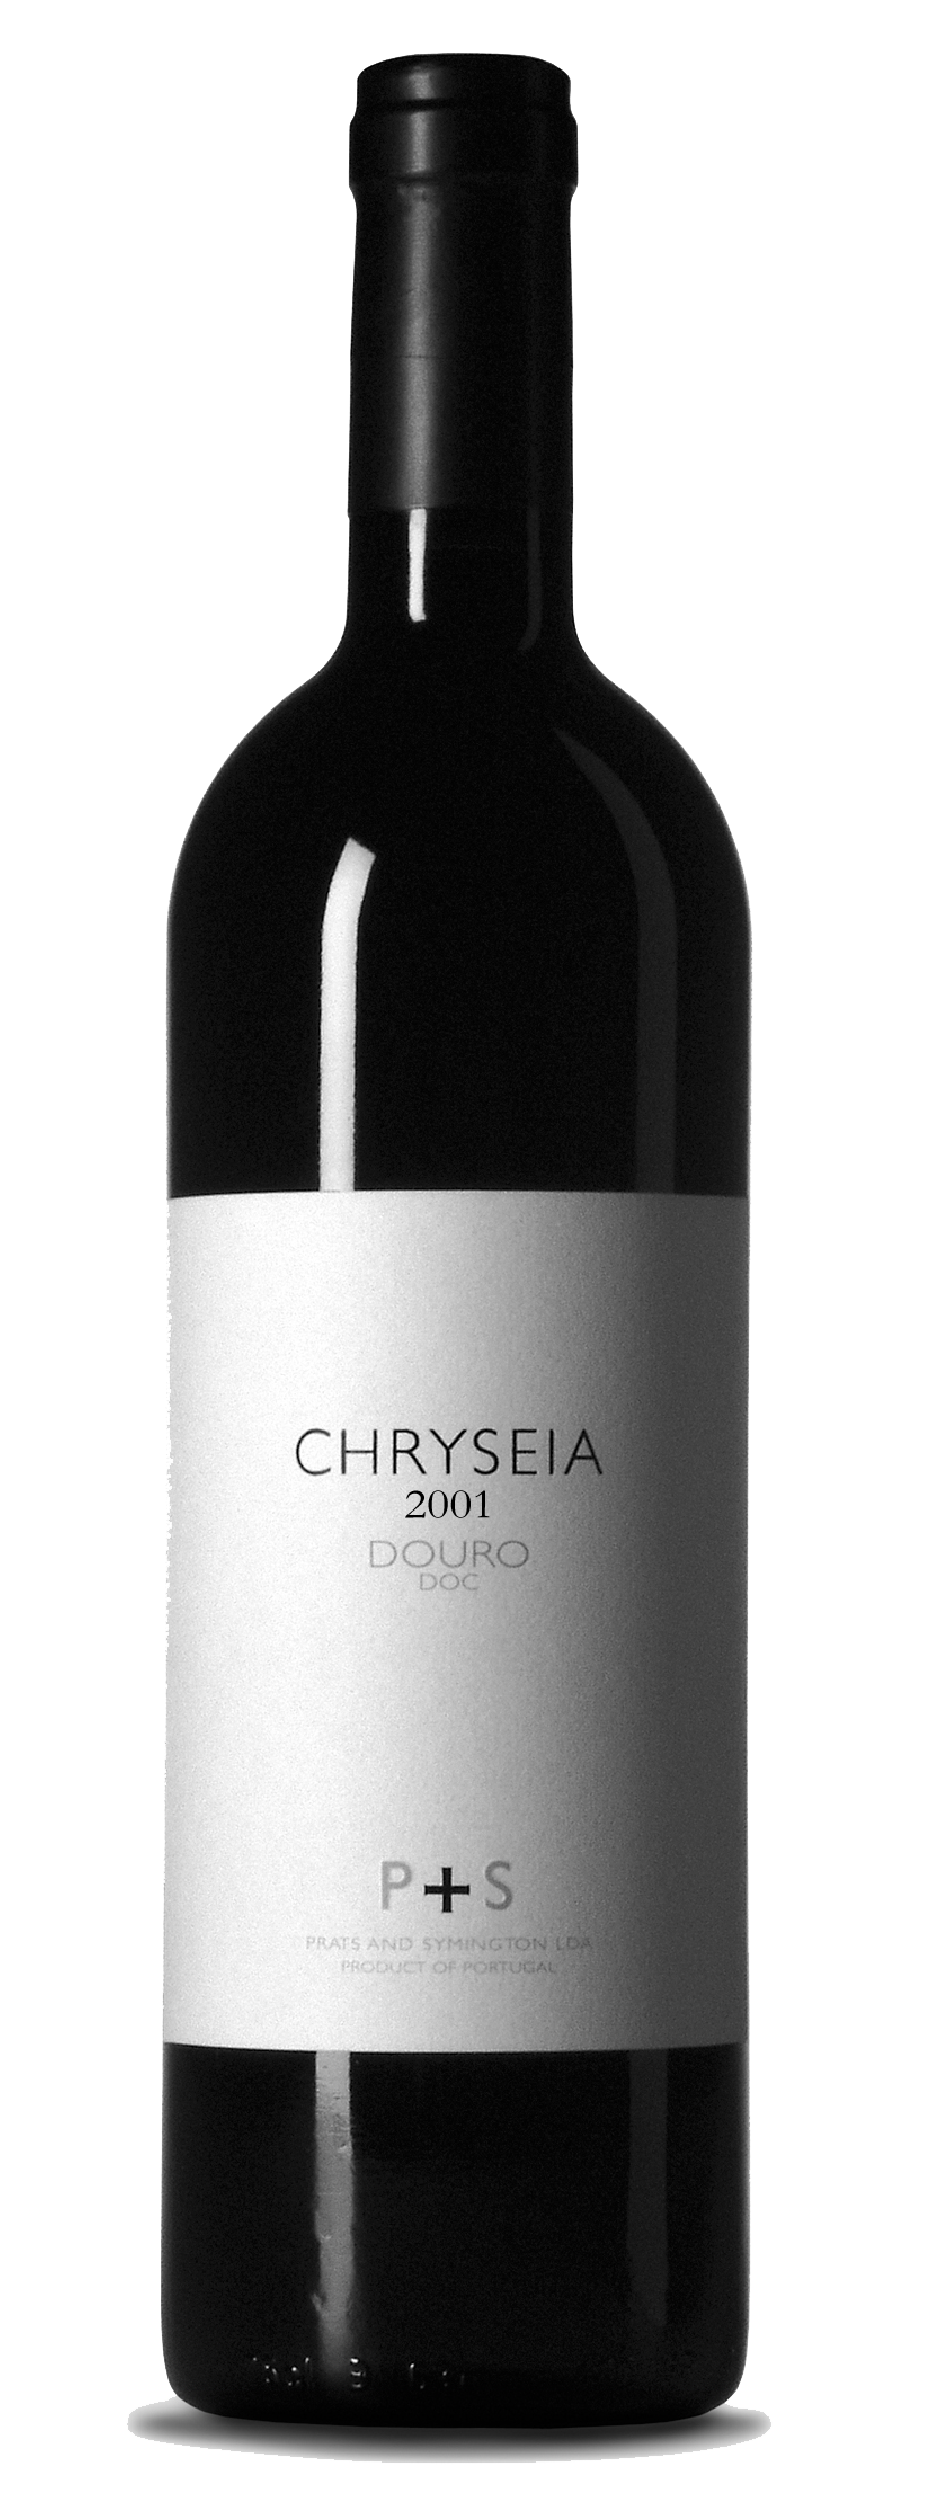 Product Image for P&S CHRYSEIA DOURO RED 2001